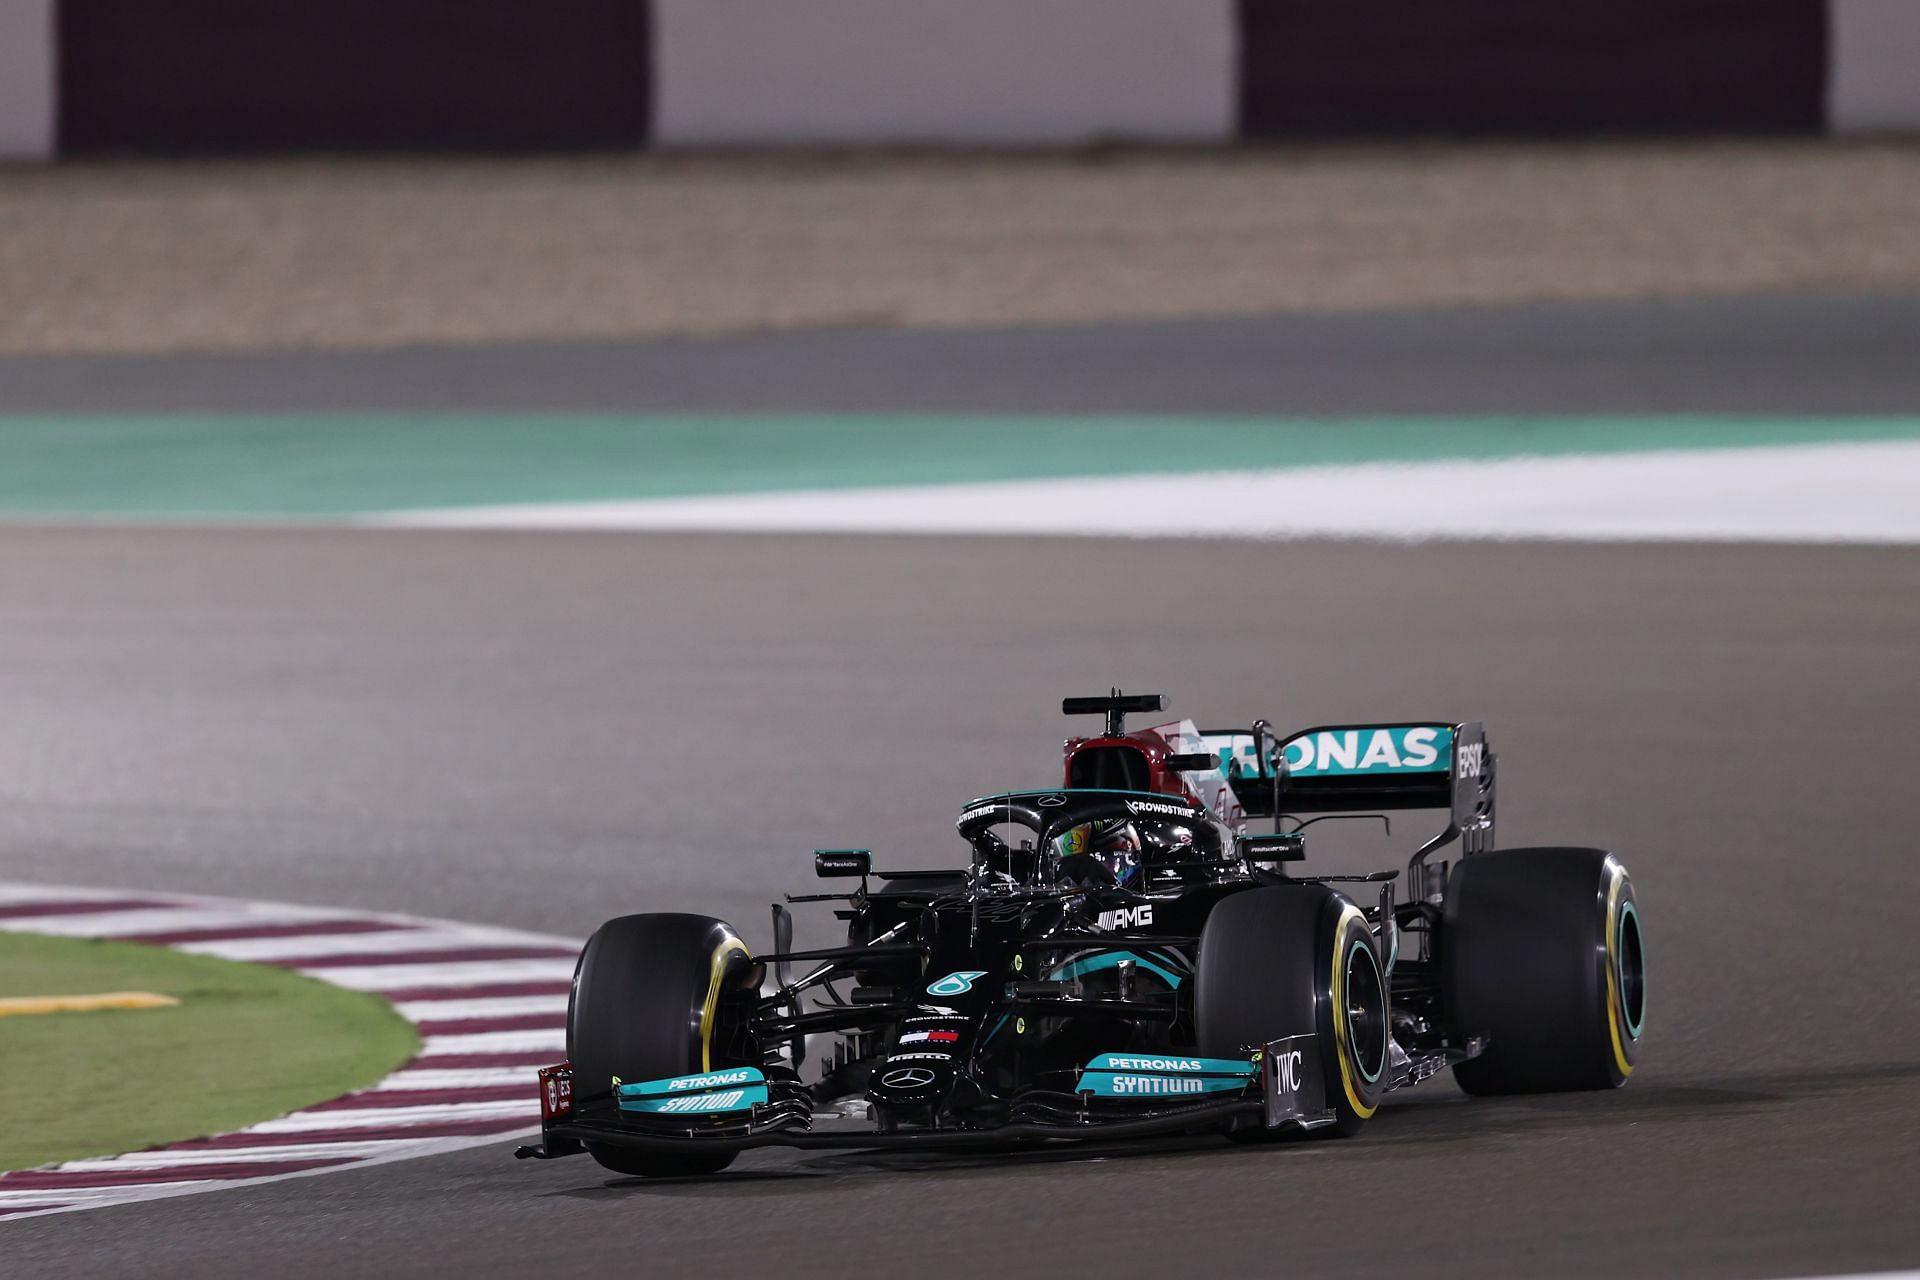 F1 Grand Prix of Qatar - Lewis Hamilton takes a right-hander during the main race on Sunday.